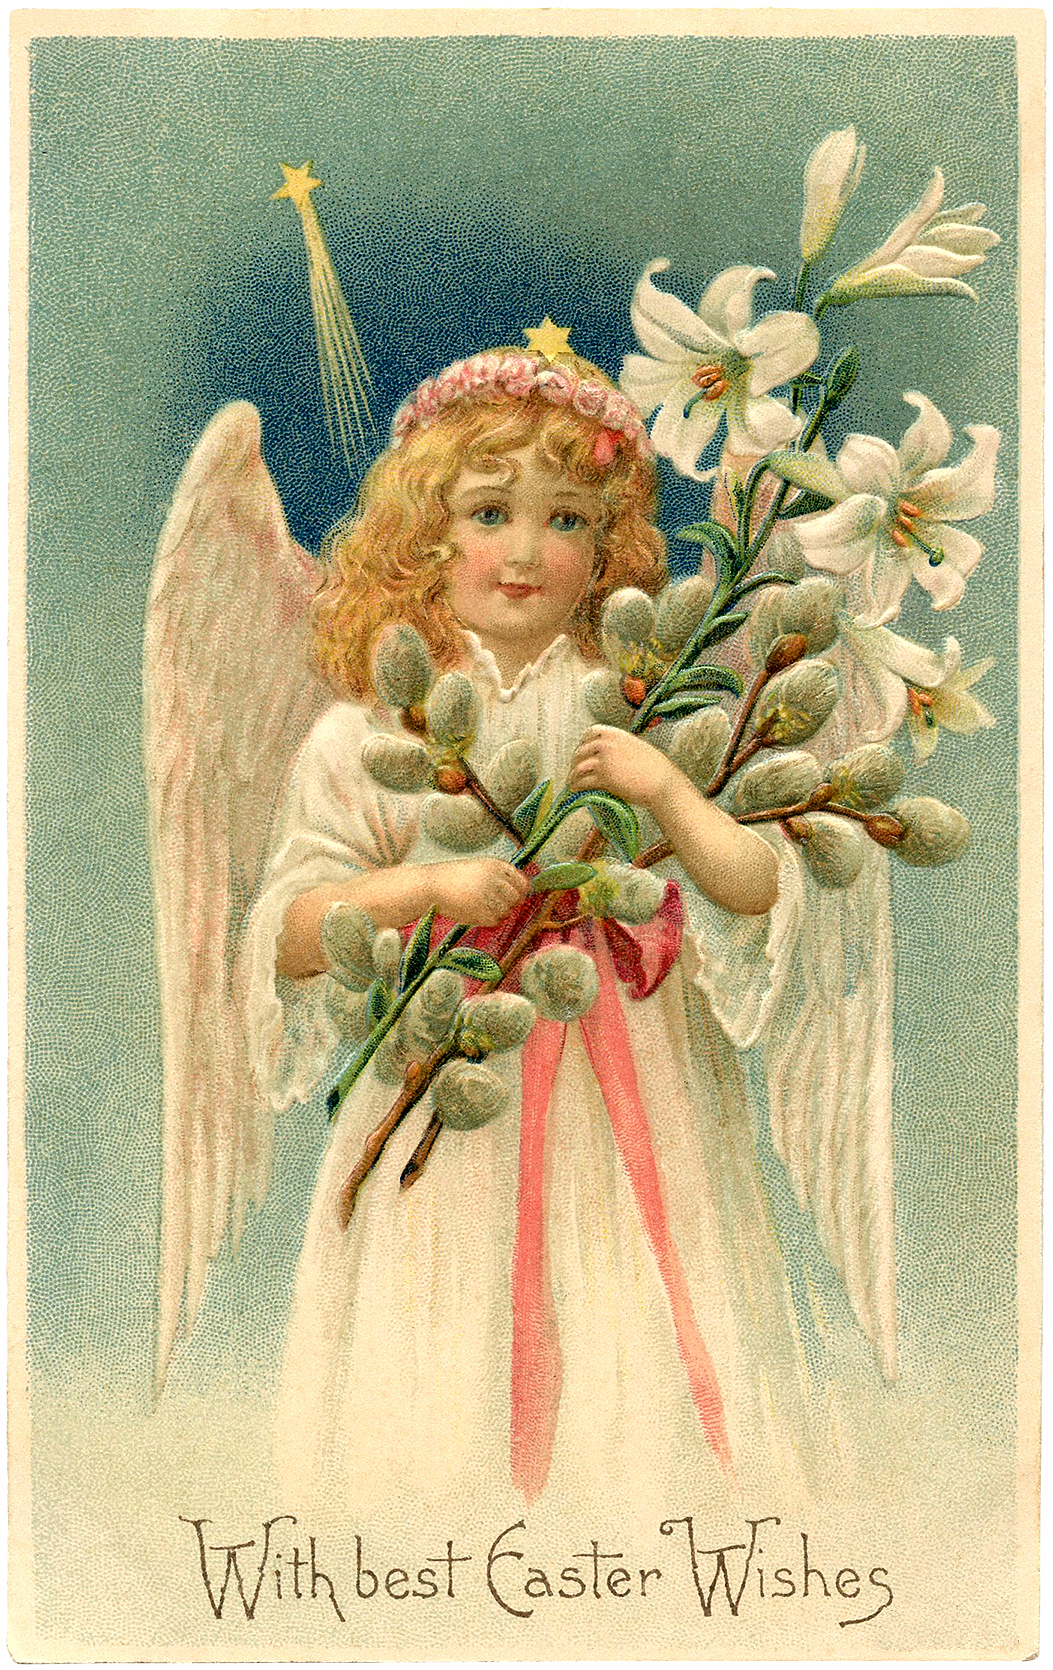 http://thegraphicsfairy.com/wp-content/uploads/2014/03/Vintage-Easter-Angel-Image-GraphicsFairy.jpg